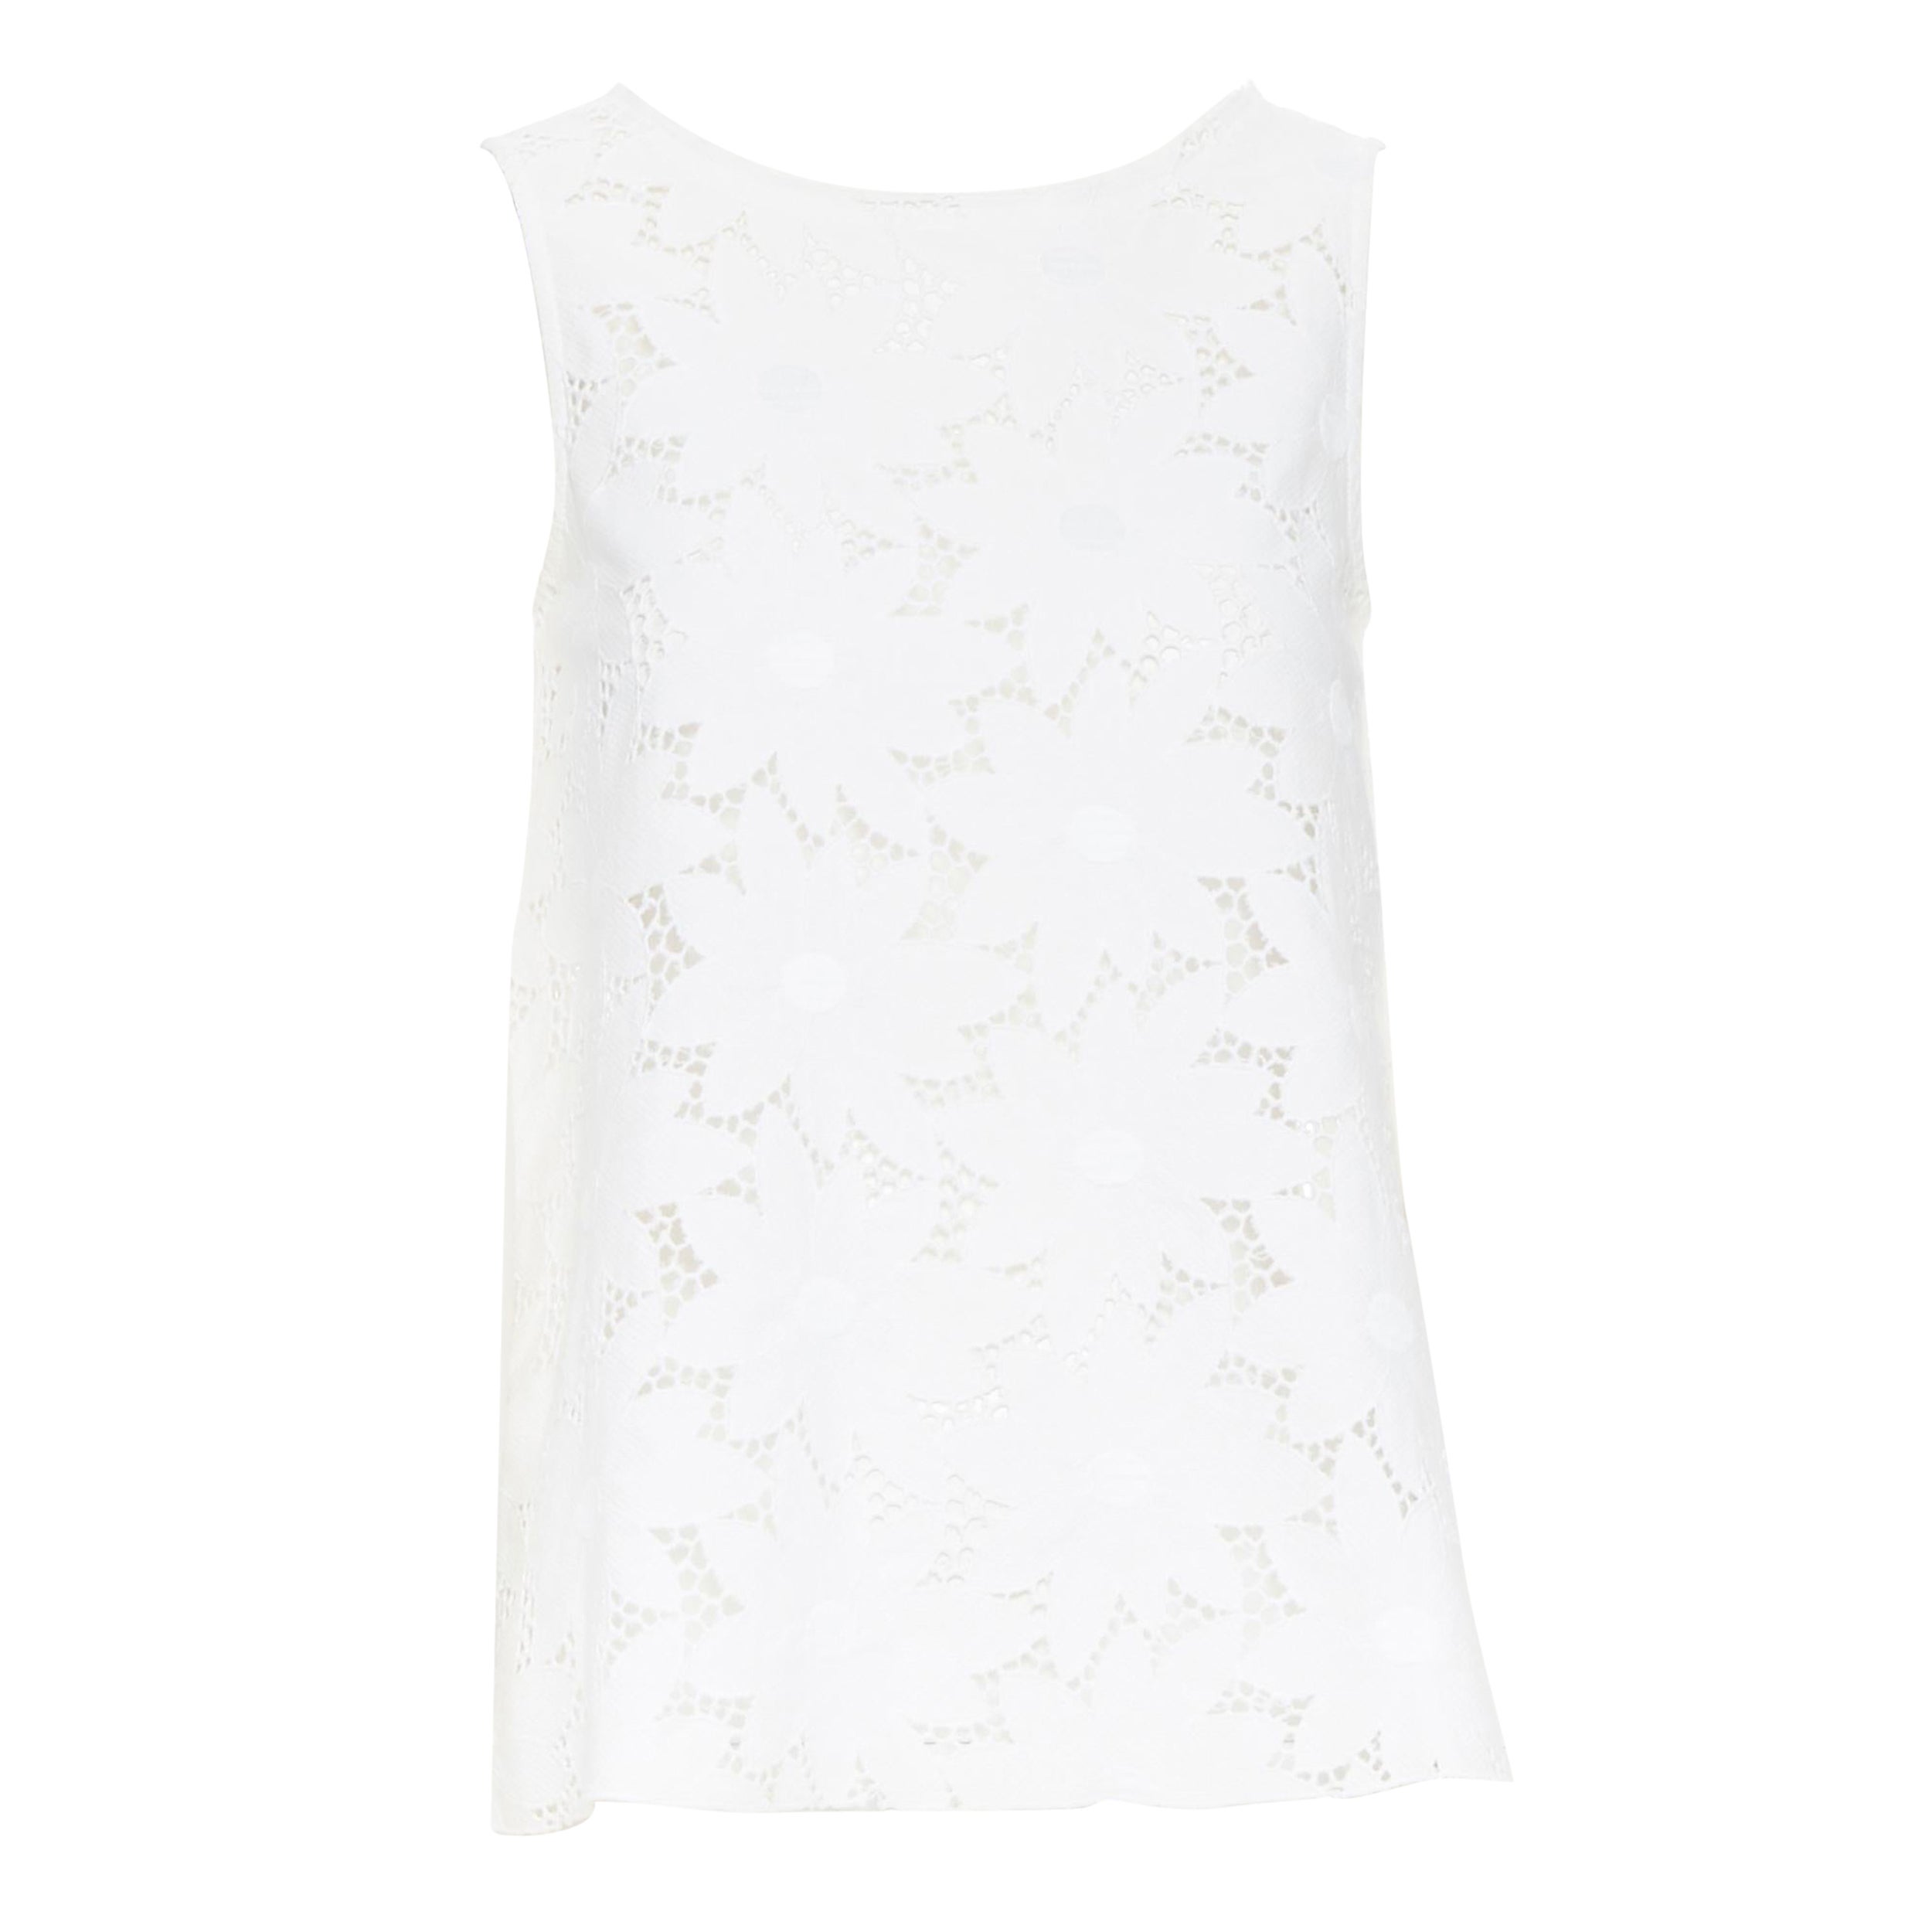 LISA PERRY 100% cotton white floral embroidery anglaise A-line sleeveless top S